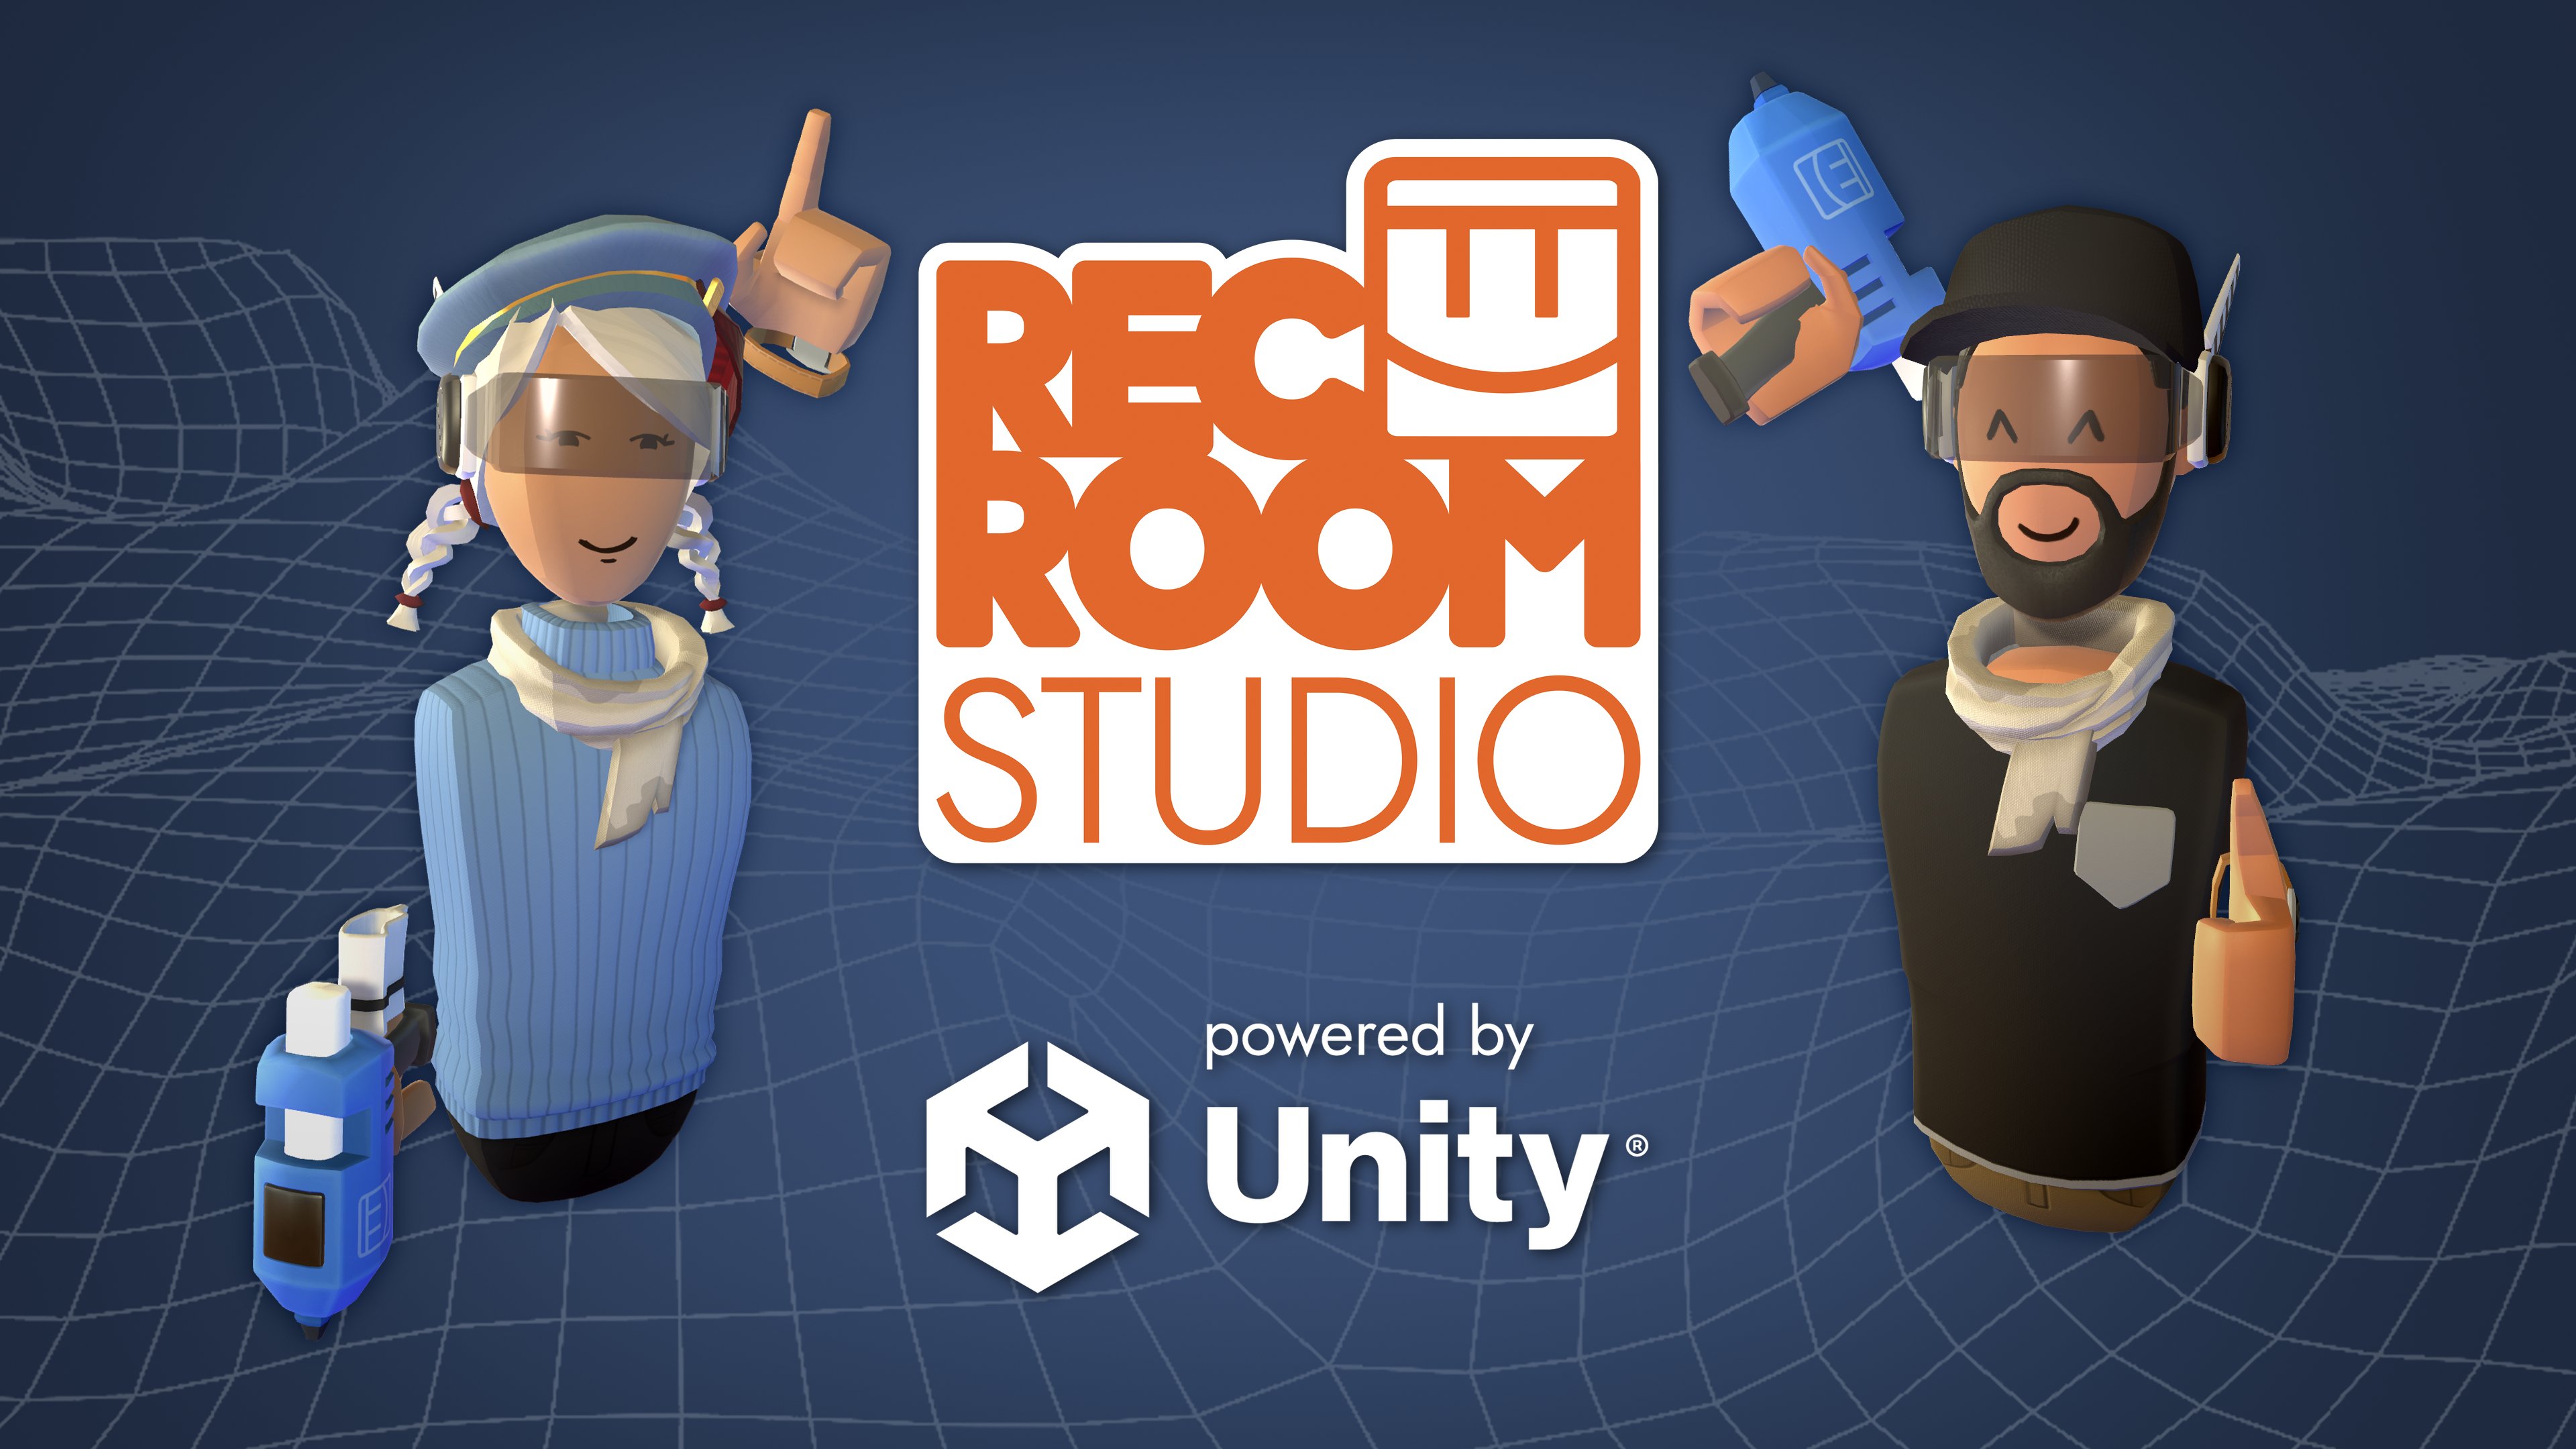 Shawn Whiting on X: The Rec Room 1M MAU stat is ONLY VR players